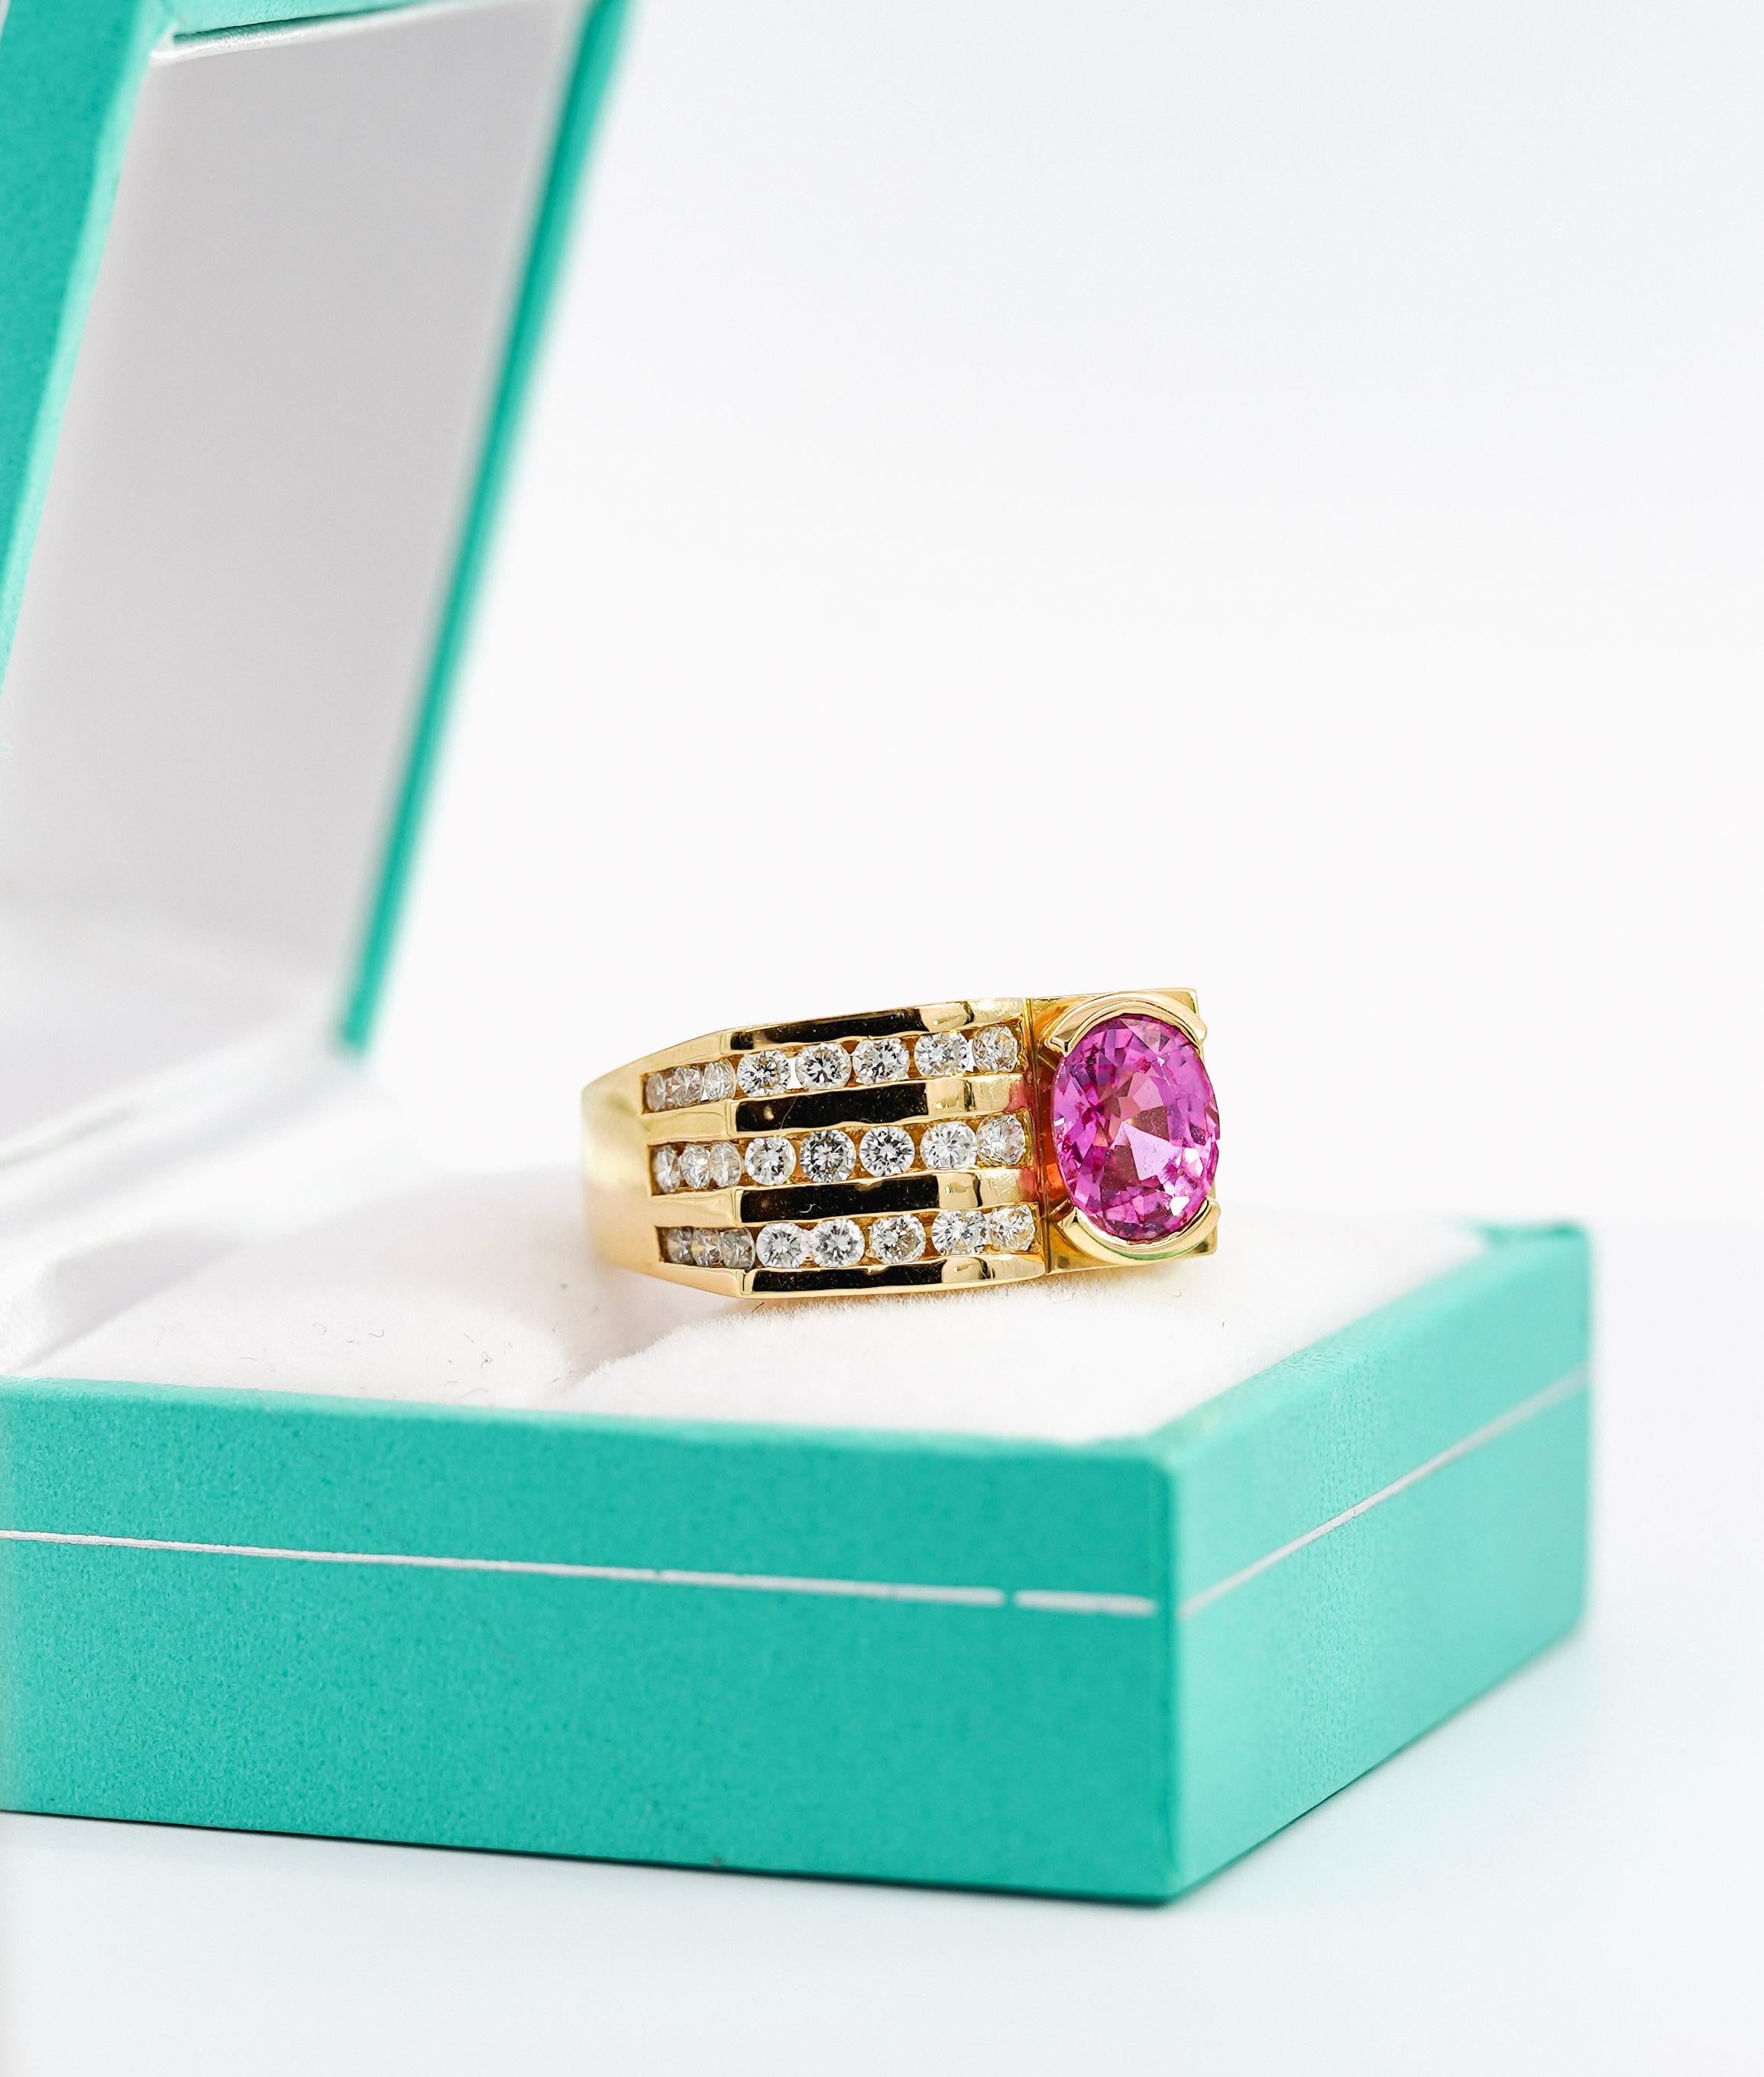 18K yellow gold ring, weighing 10.29 grams and boasting a size 8. Featuring a 2.77 Carat oval cut natural Pink Sapphire with a half bezel setting. Complemented with 24 round-cut diamonds in channel setting. The ring features a stunning horizontal